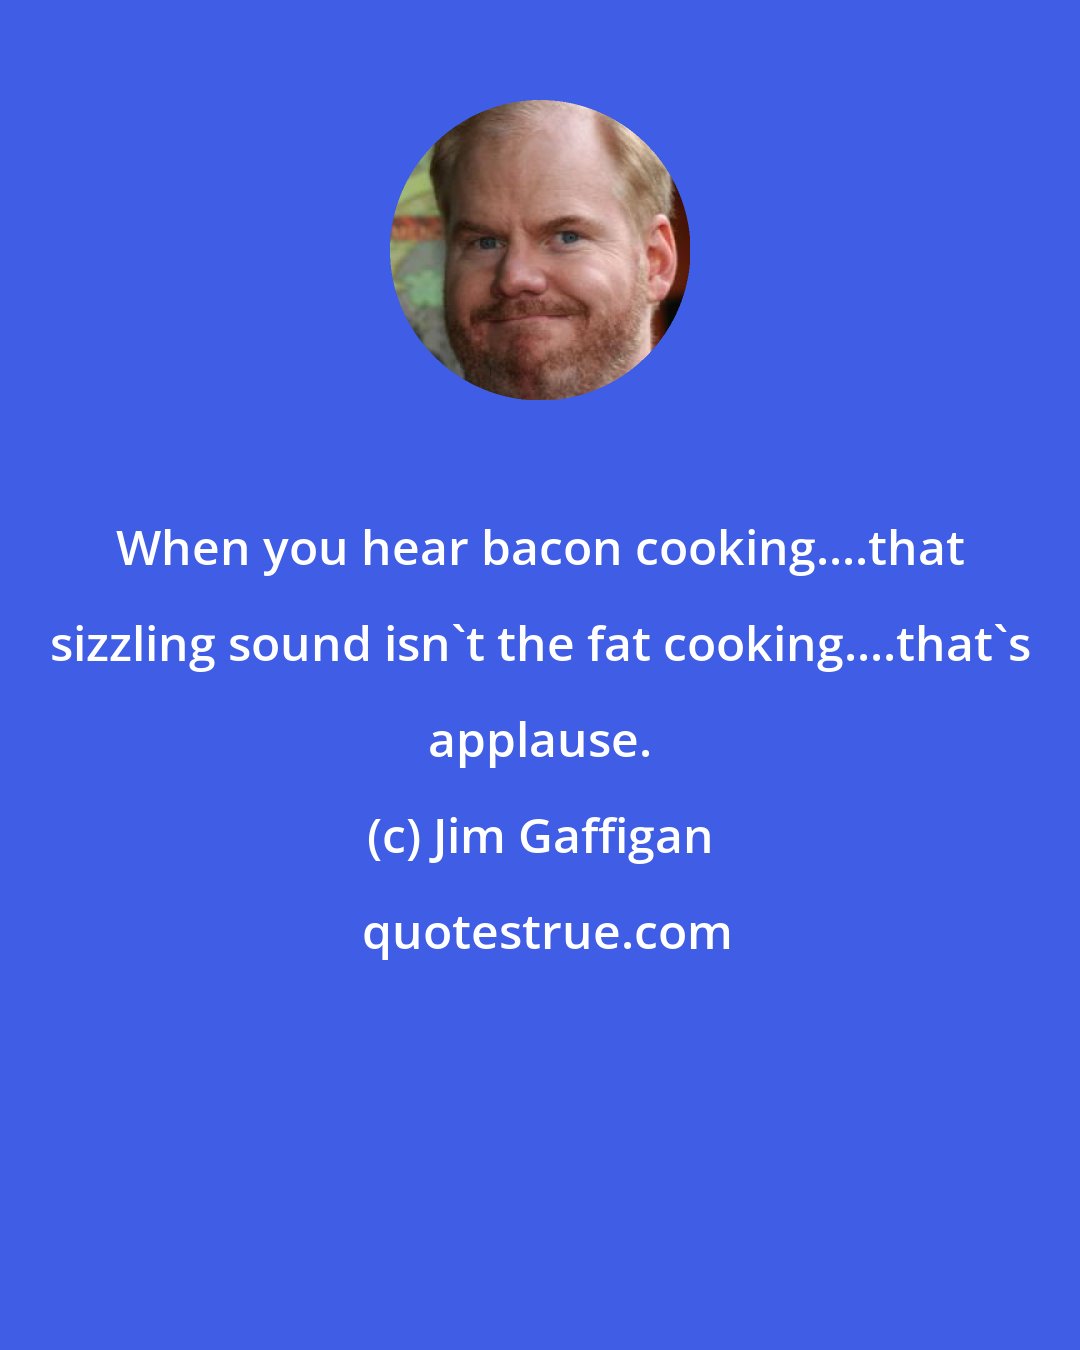 Jim Gaffigan: When you hear bacon cooking....that sizzling sound isn't the fat cooking....that's applause.